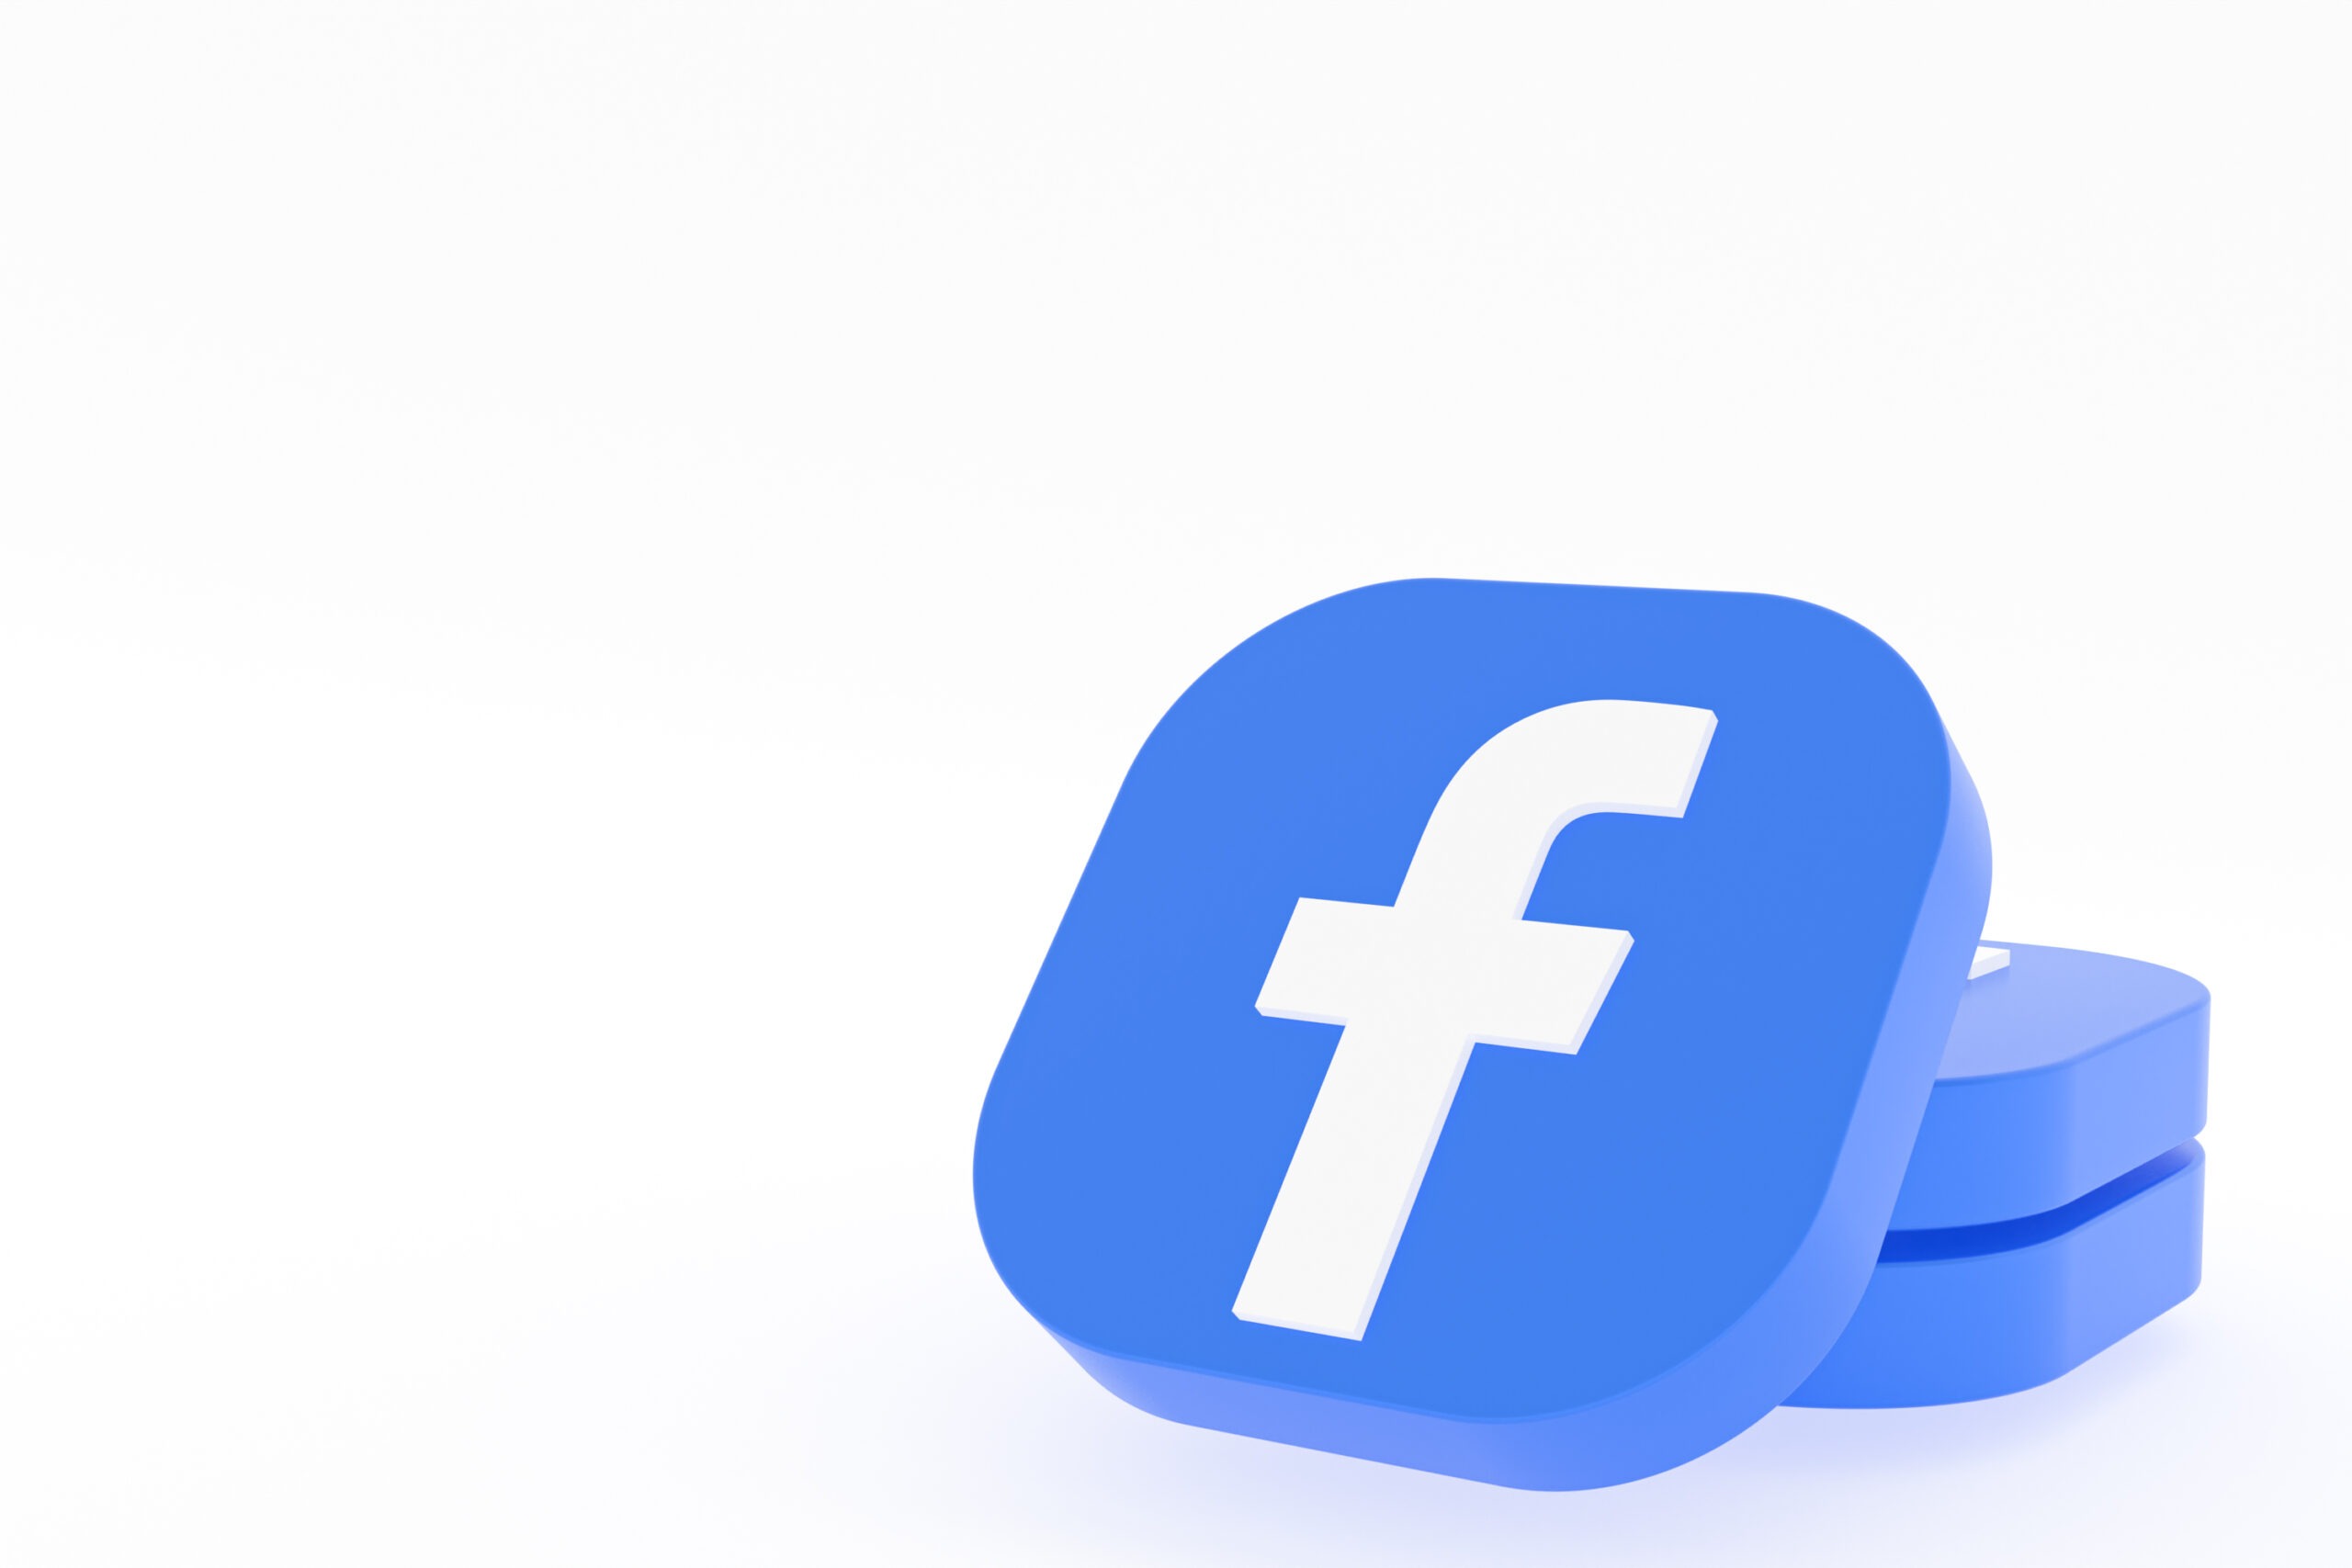 3D rendering of the Facebook icon in a tile format stack on top of a few other blue tiles.